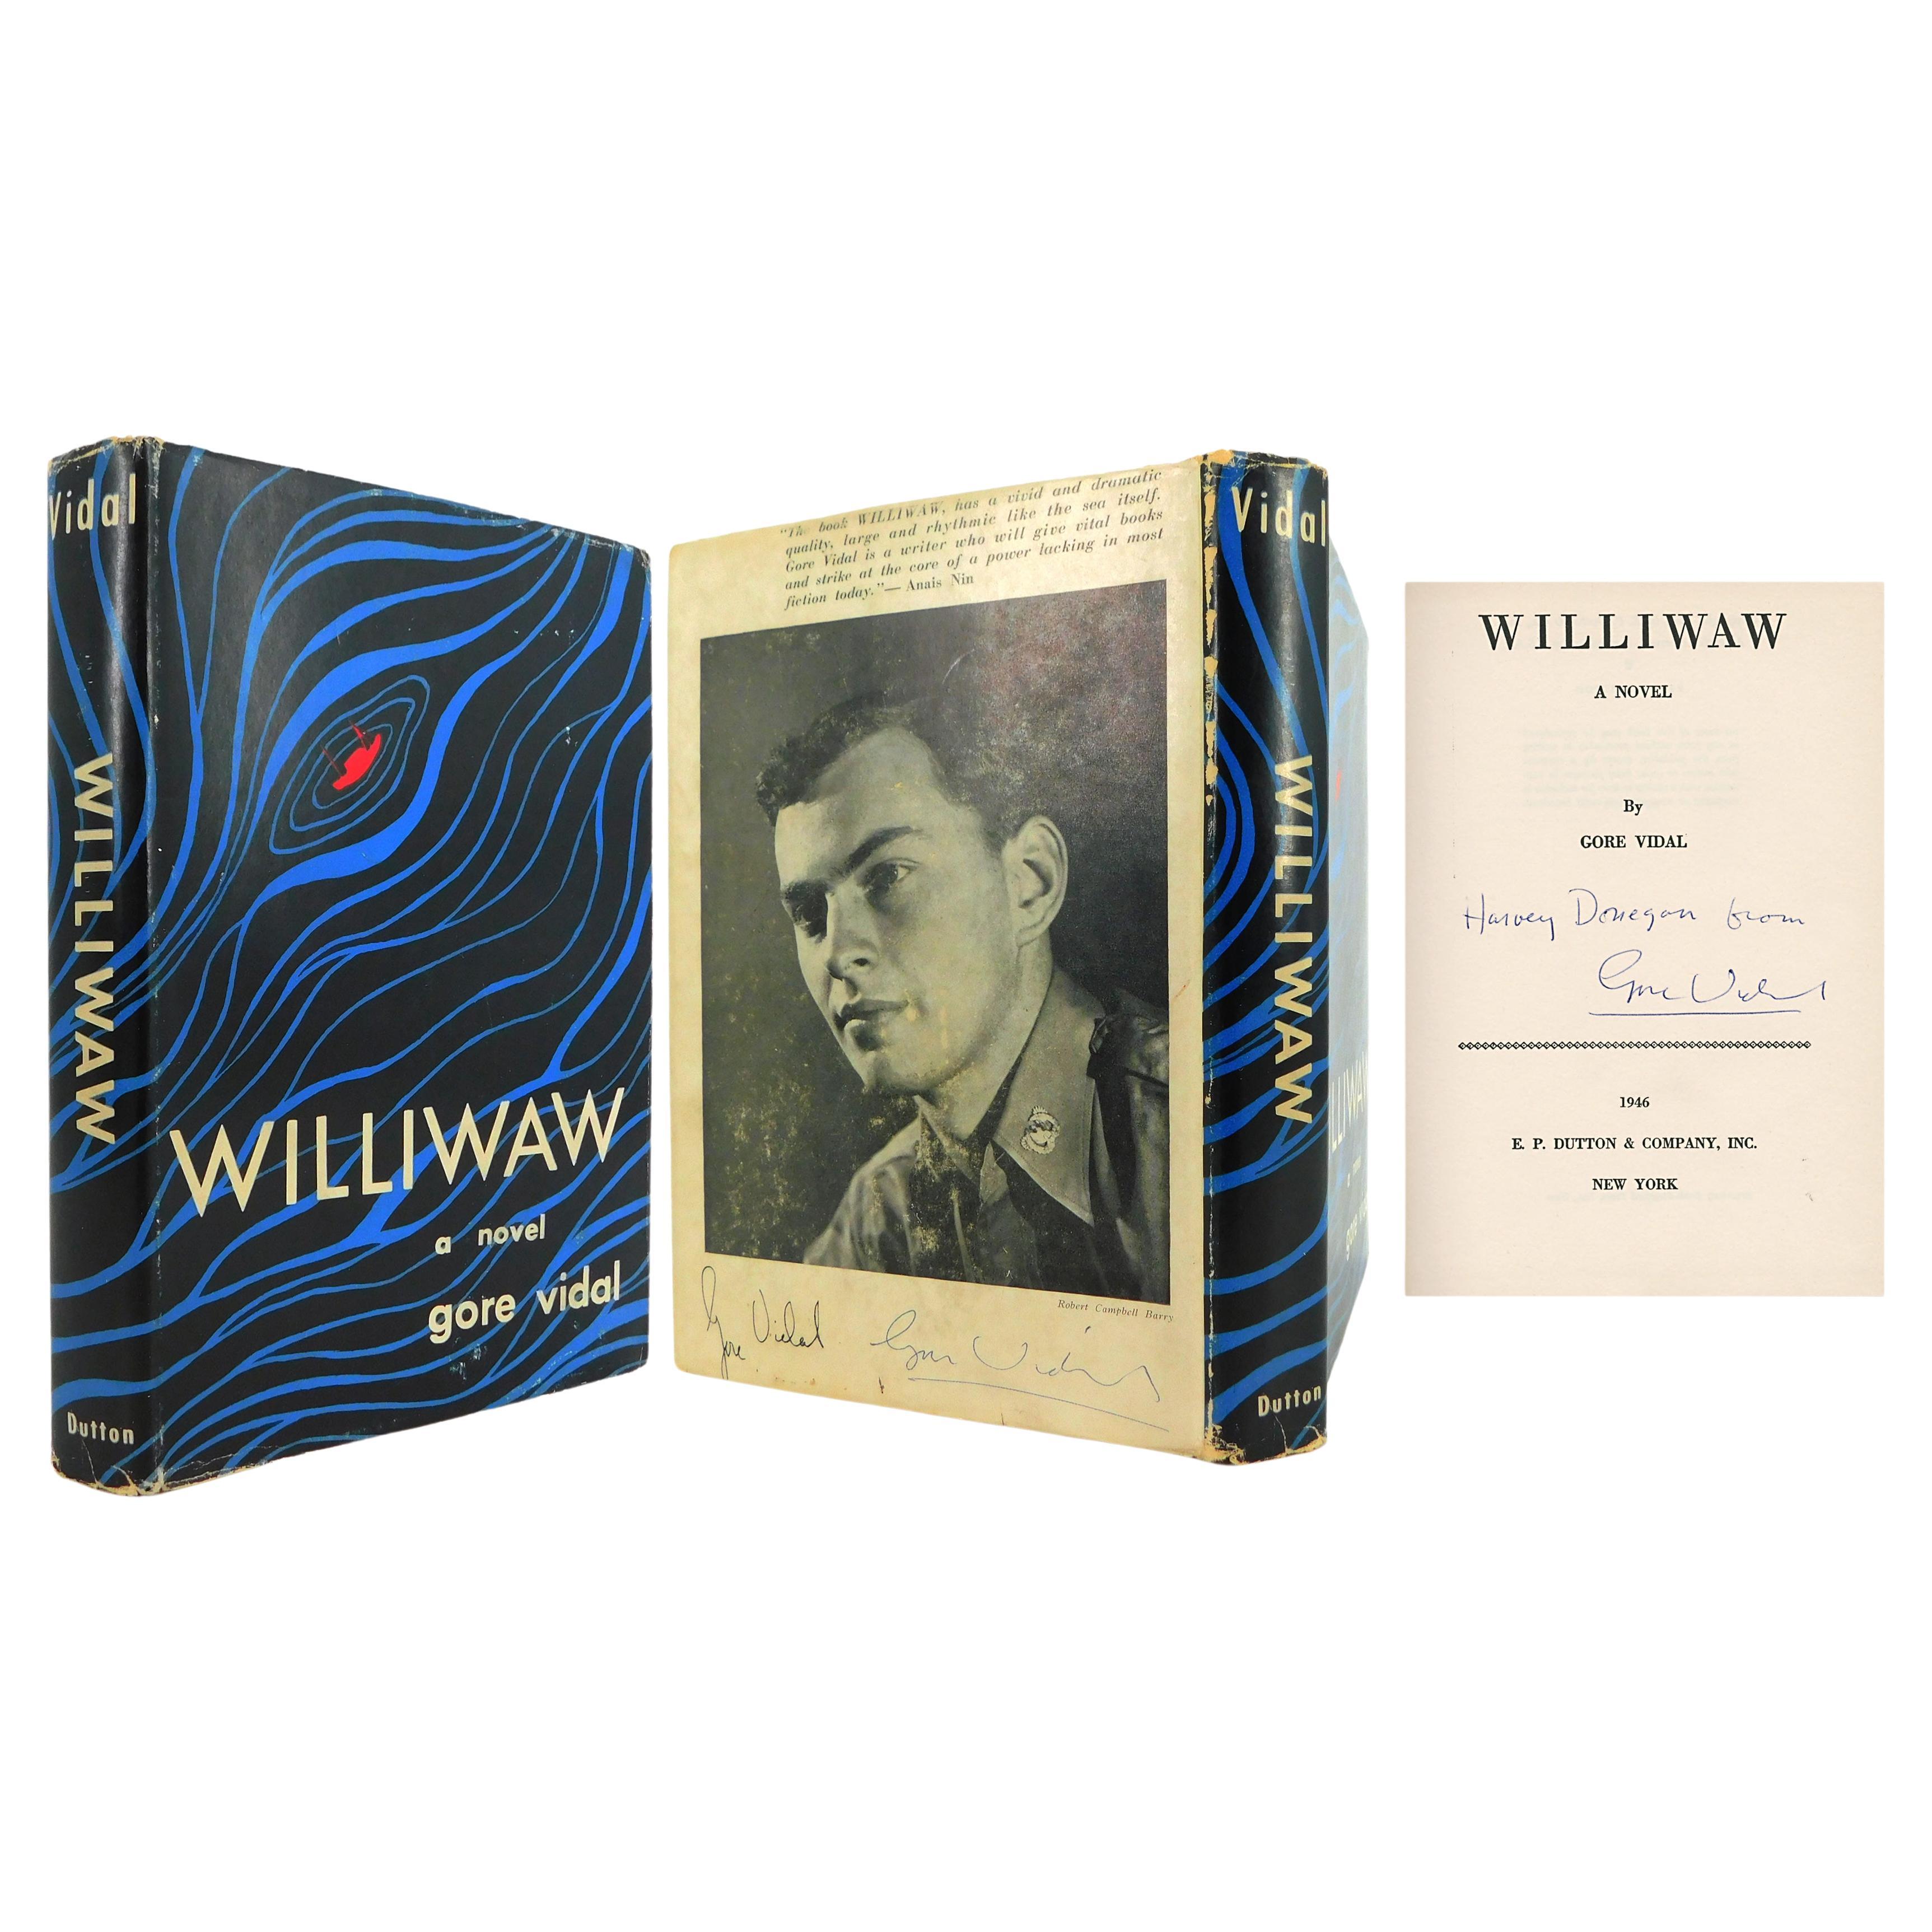 Gore Vidal's First Novel "WILLIWAW", Signed First Edition